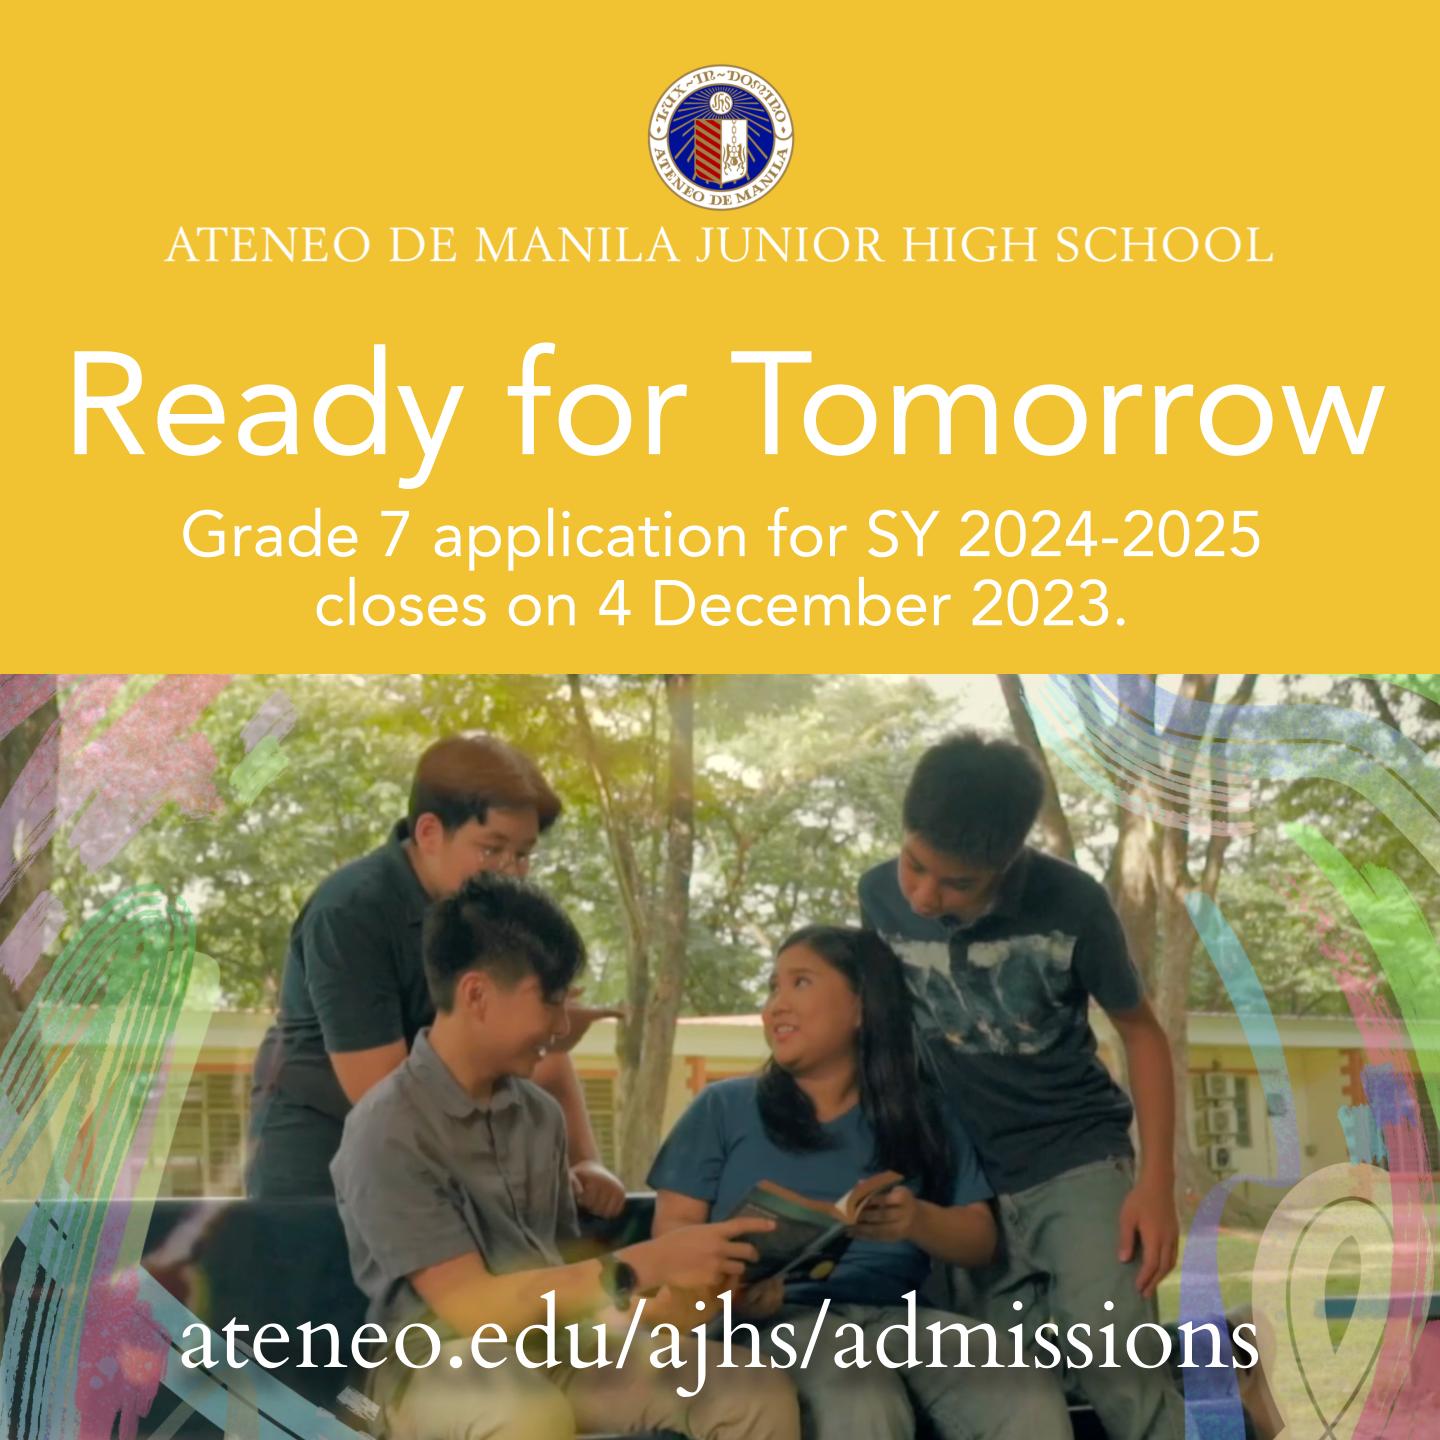 Grade 7 application for SY 2024-2025 closes on 4 December 2023